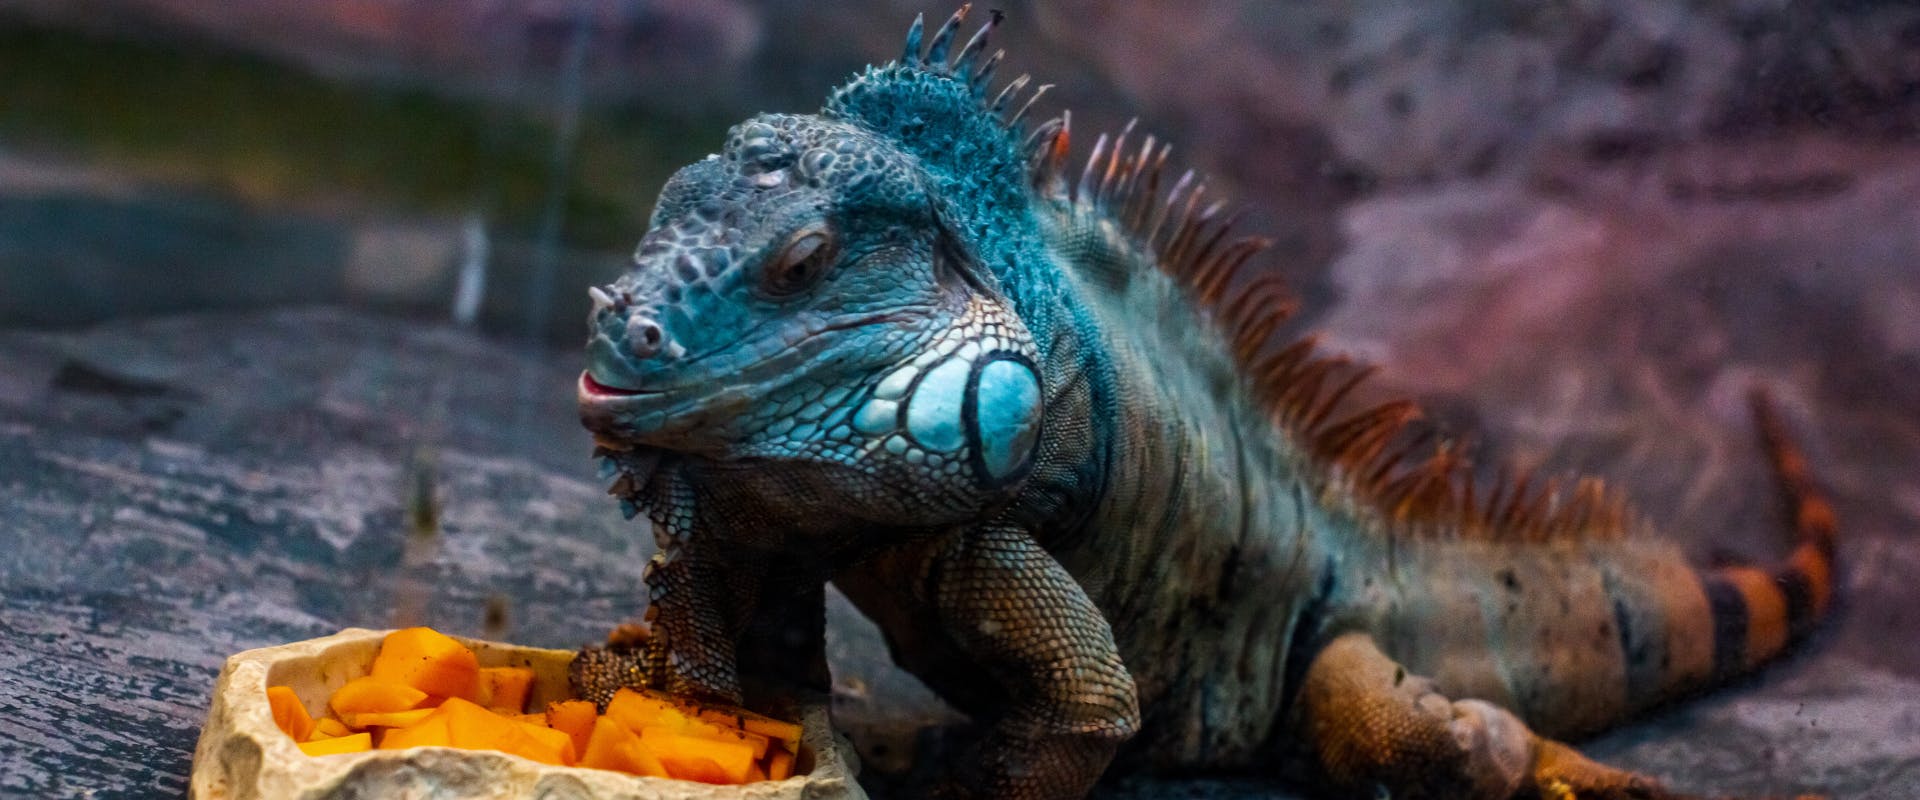 a bright blue iguana eating carrot pieces out of a food bowl in an enclosure